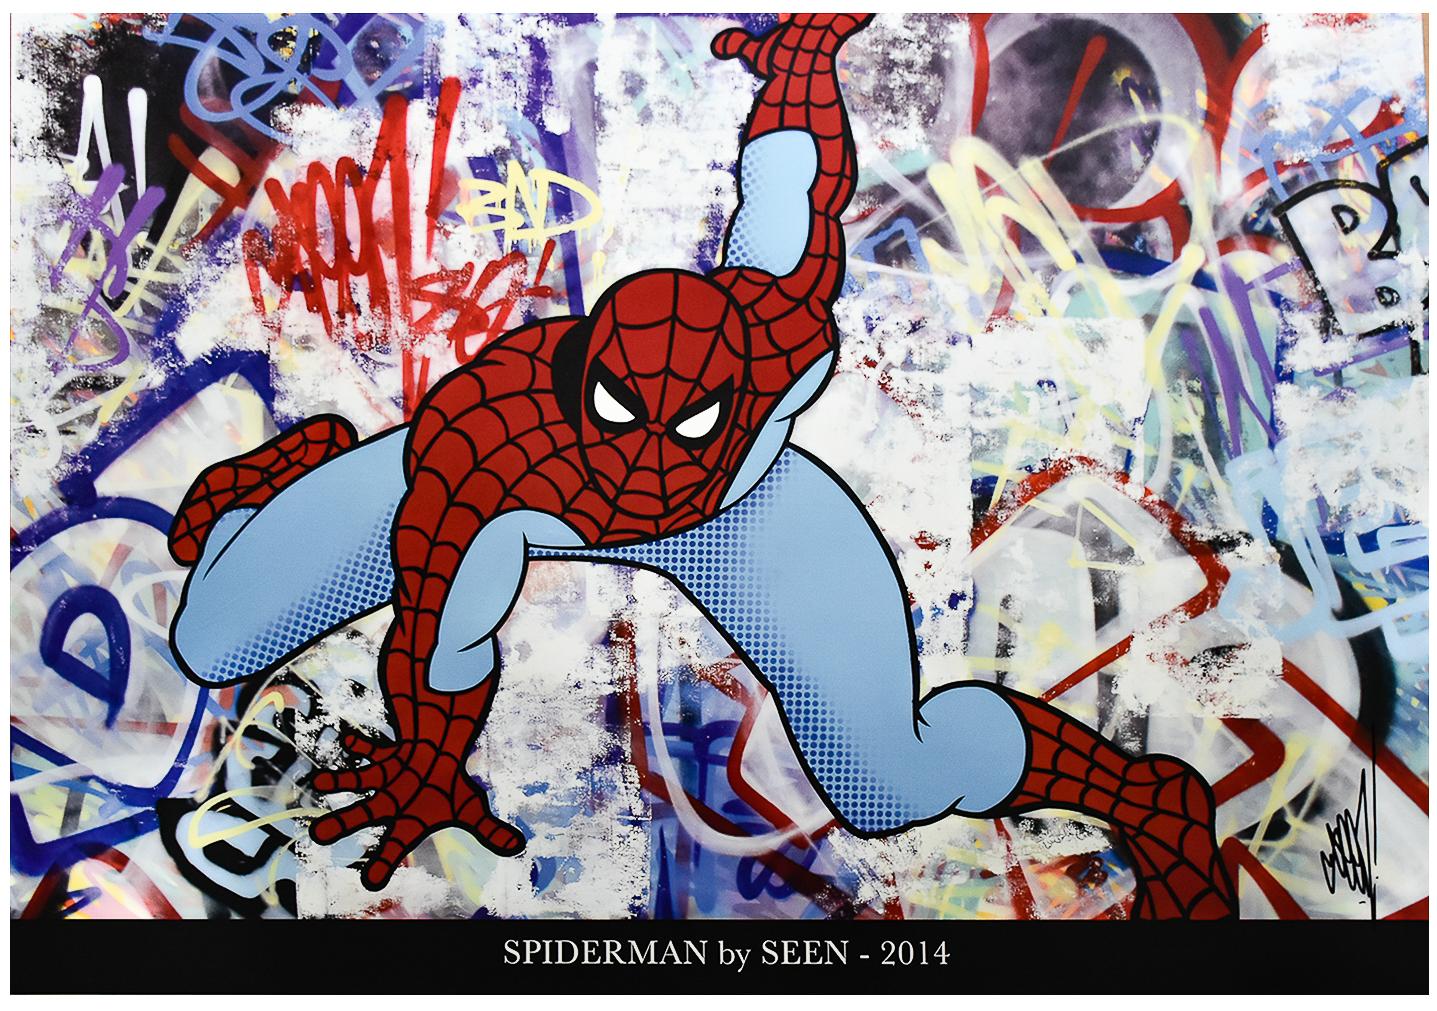 SEEN Spiderman (Signed Poster) - Print by Seen